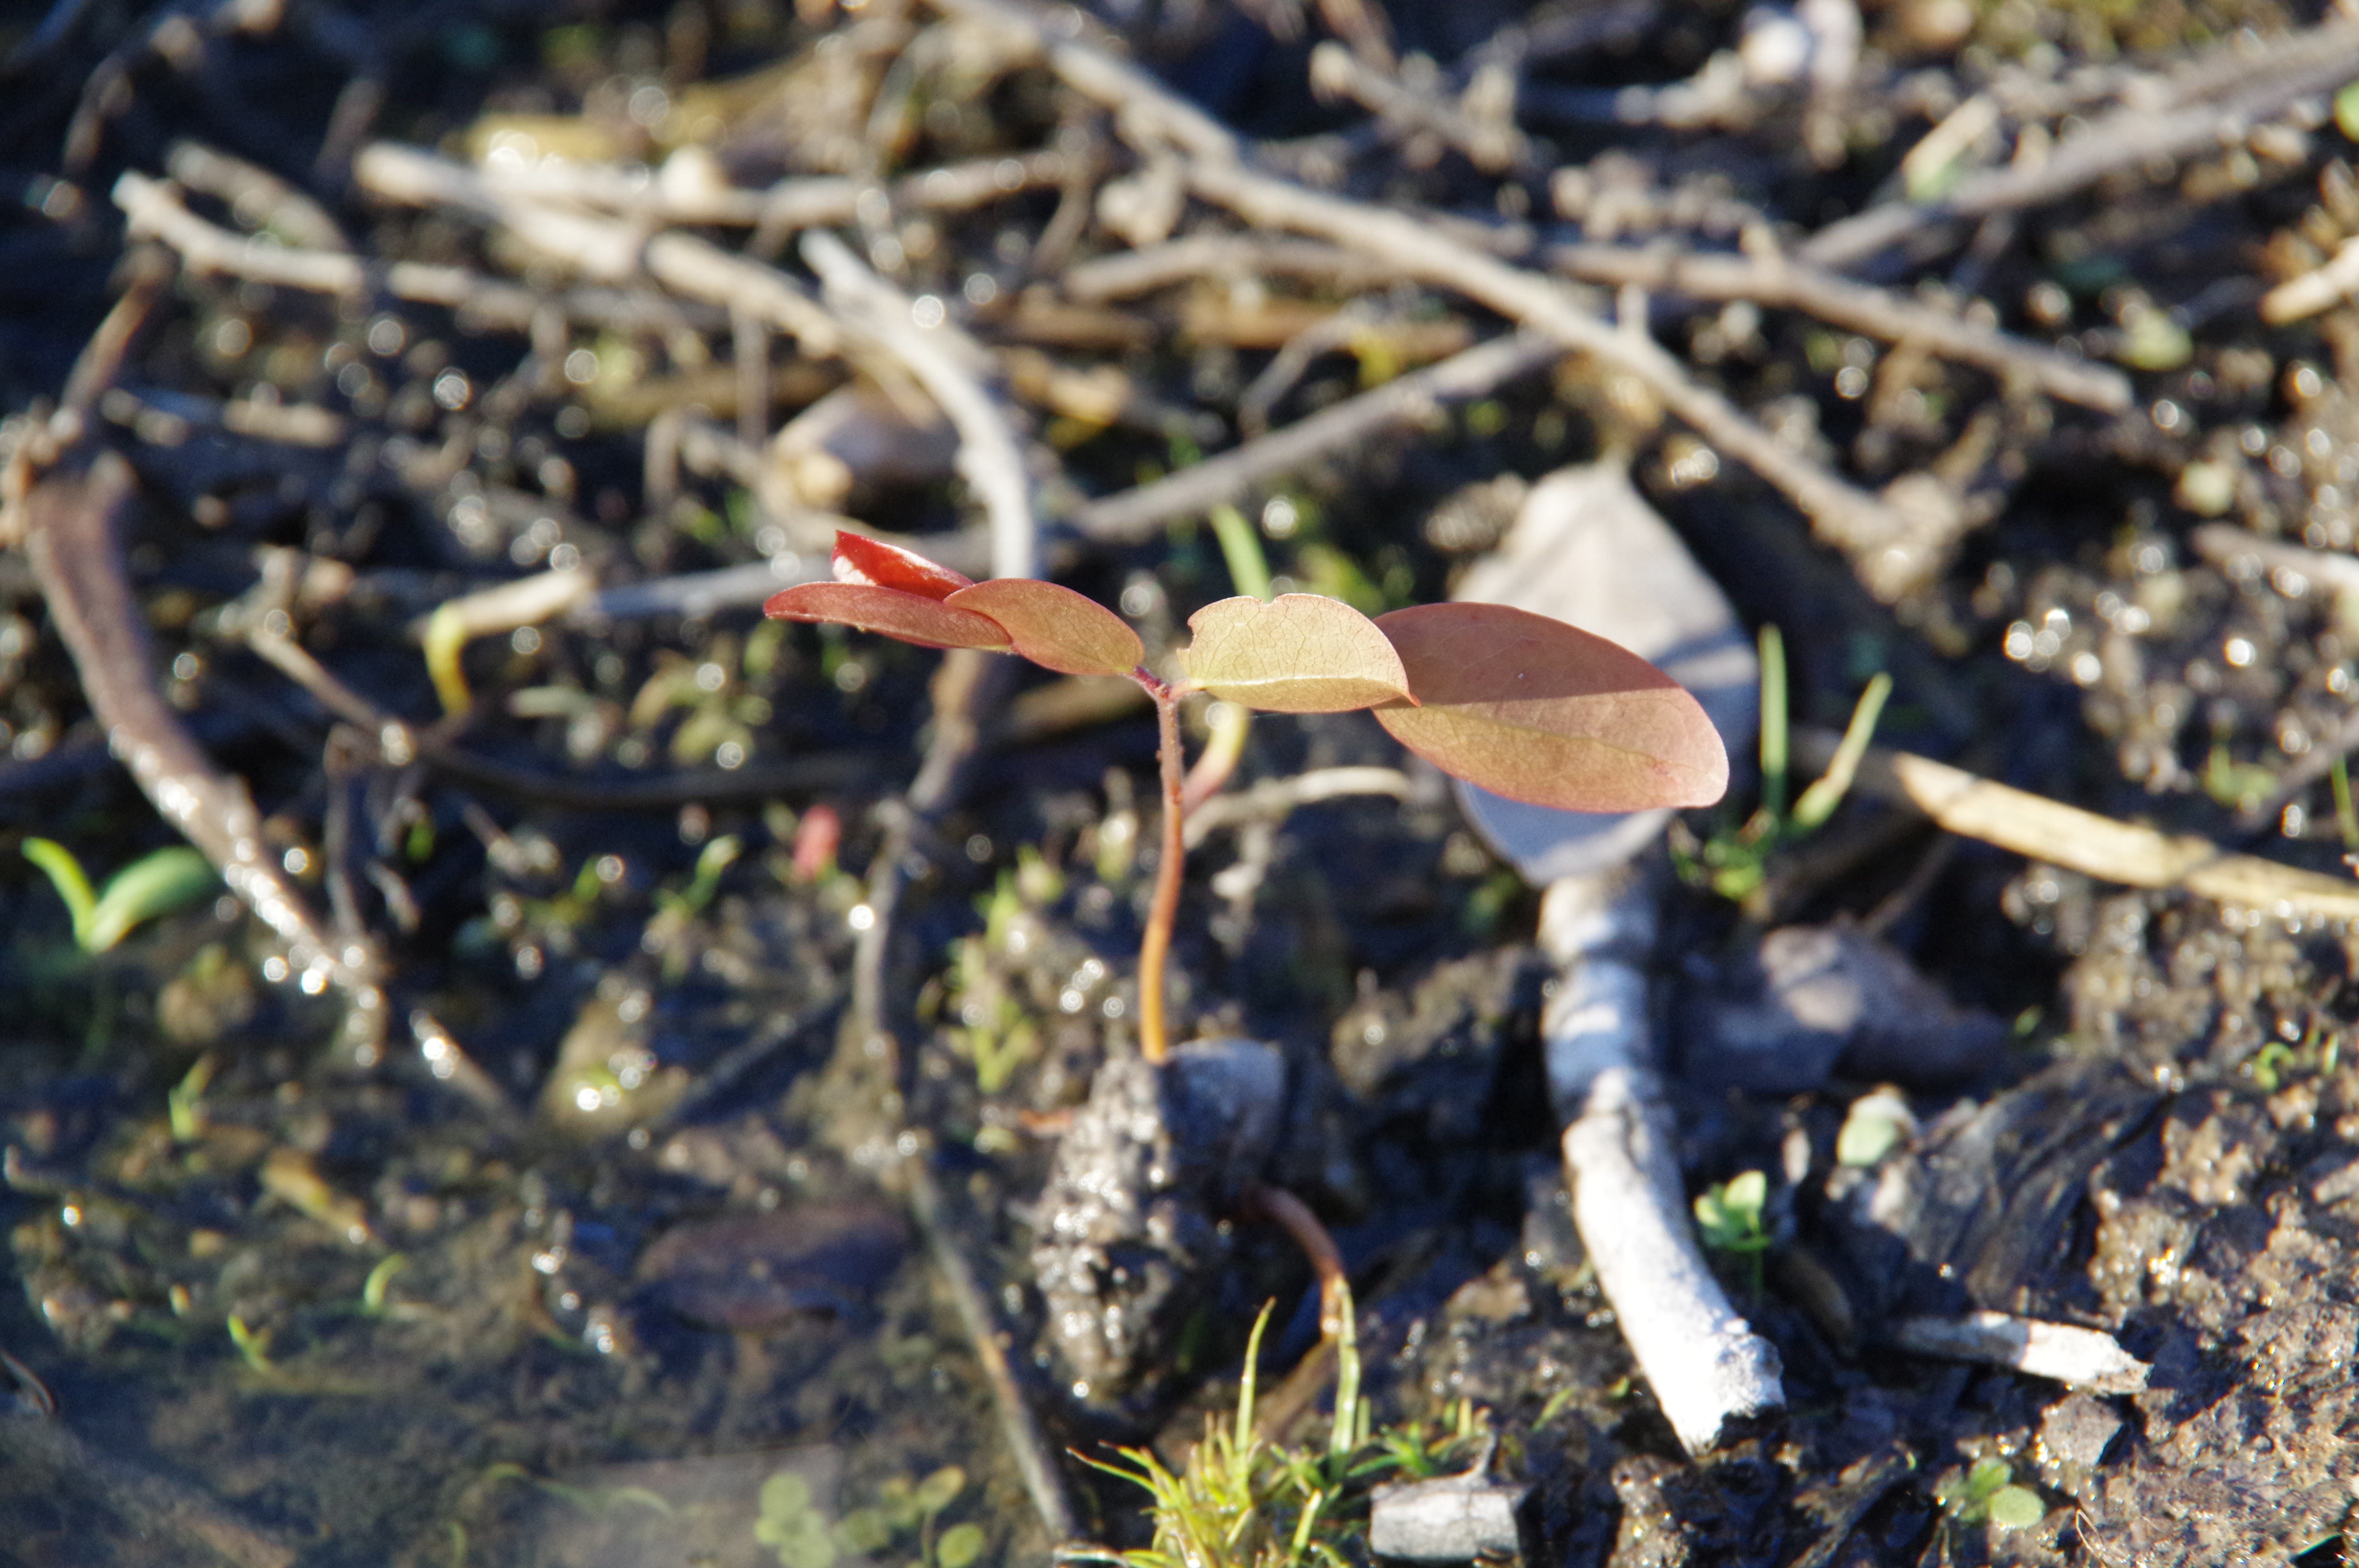 A small tree seedling emerging from the wet soil